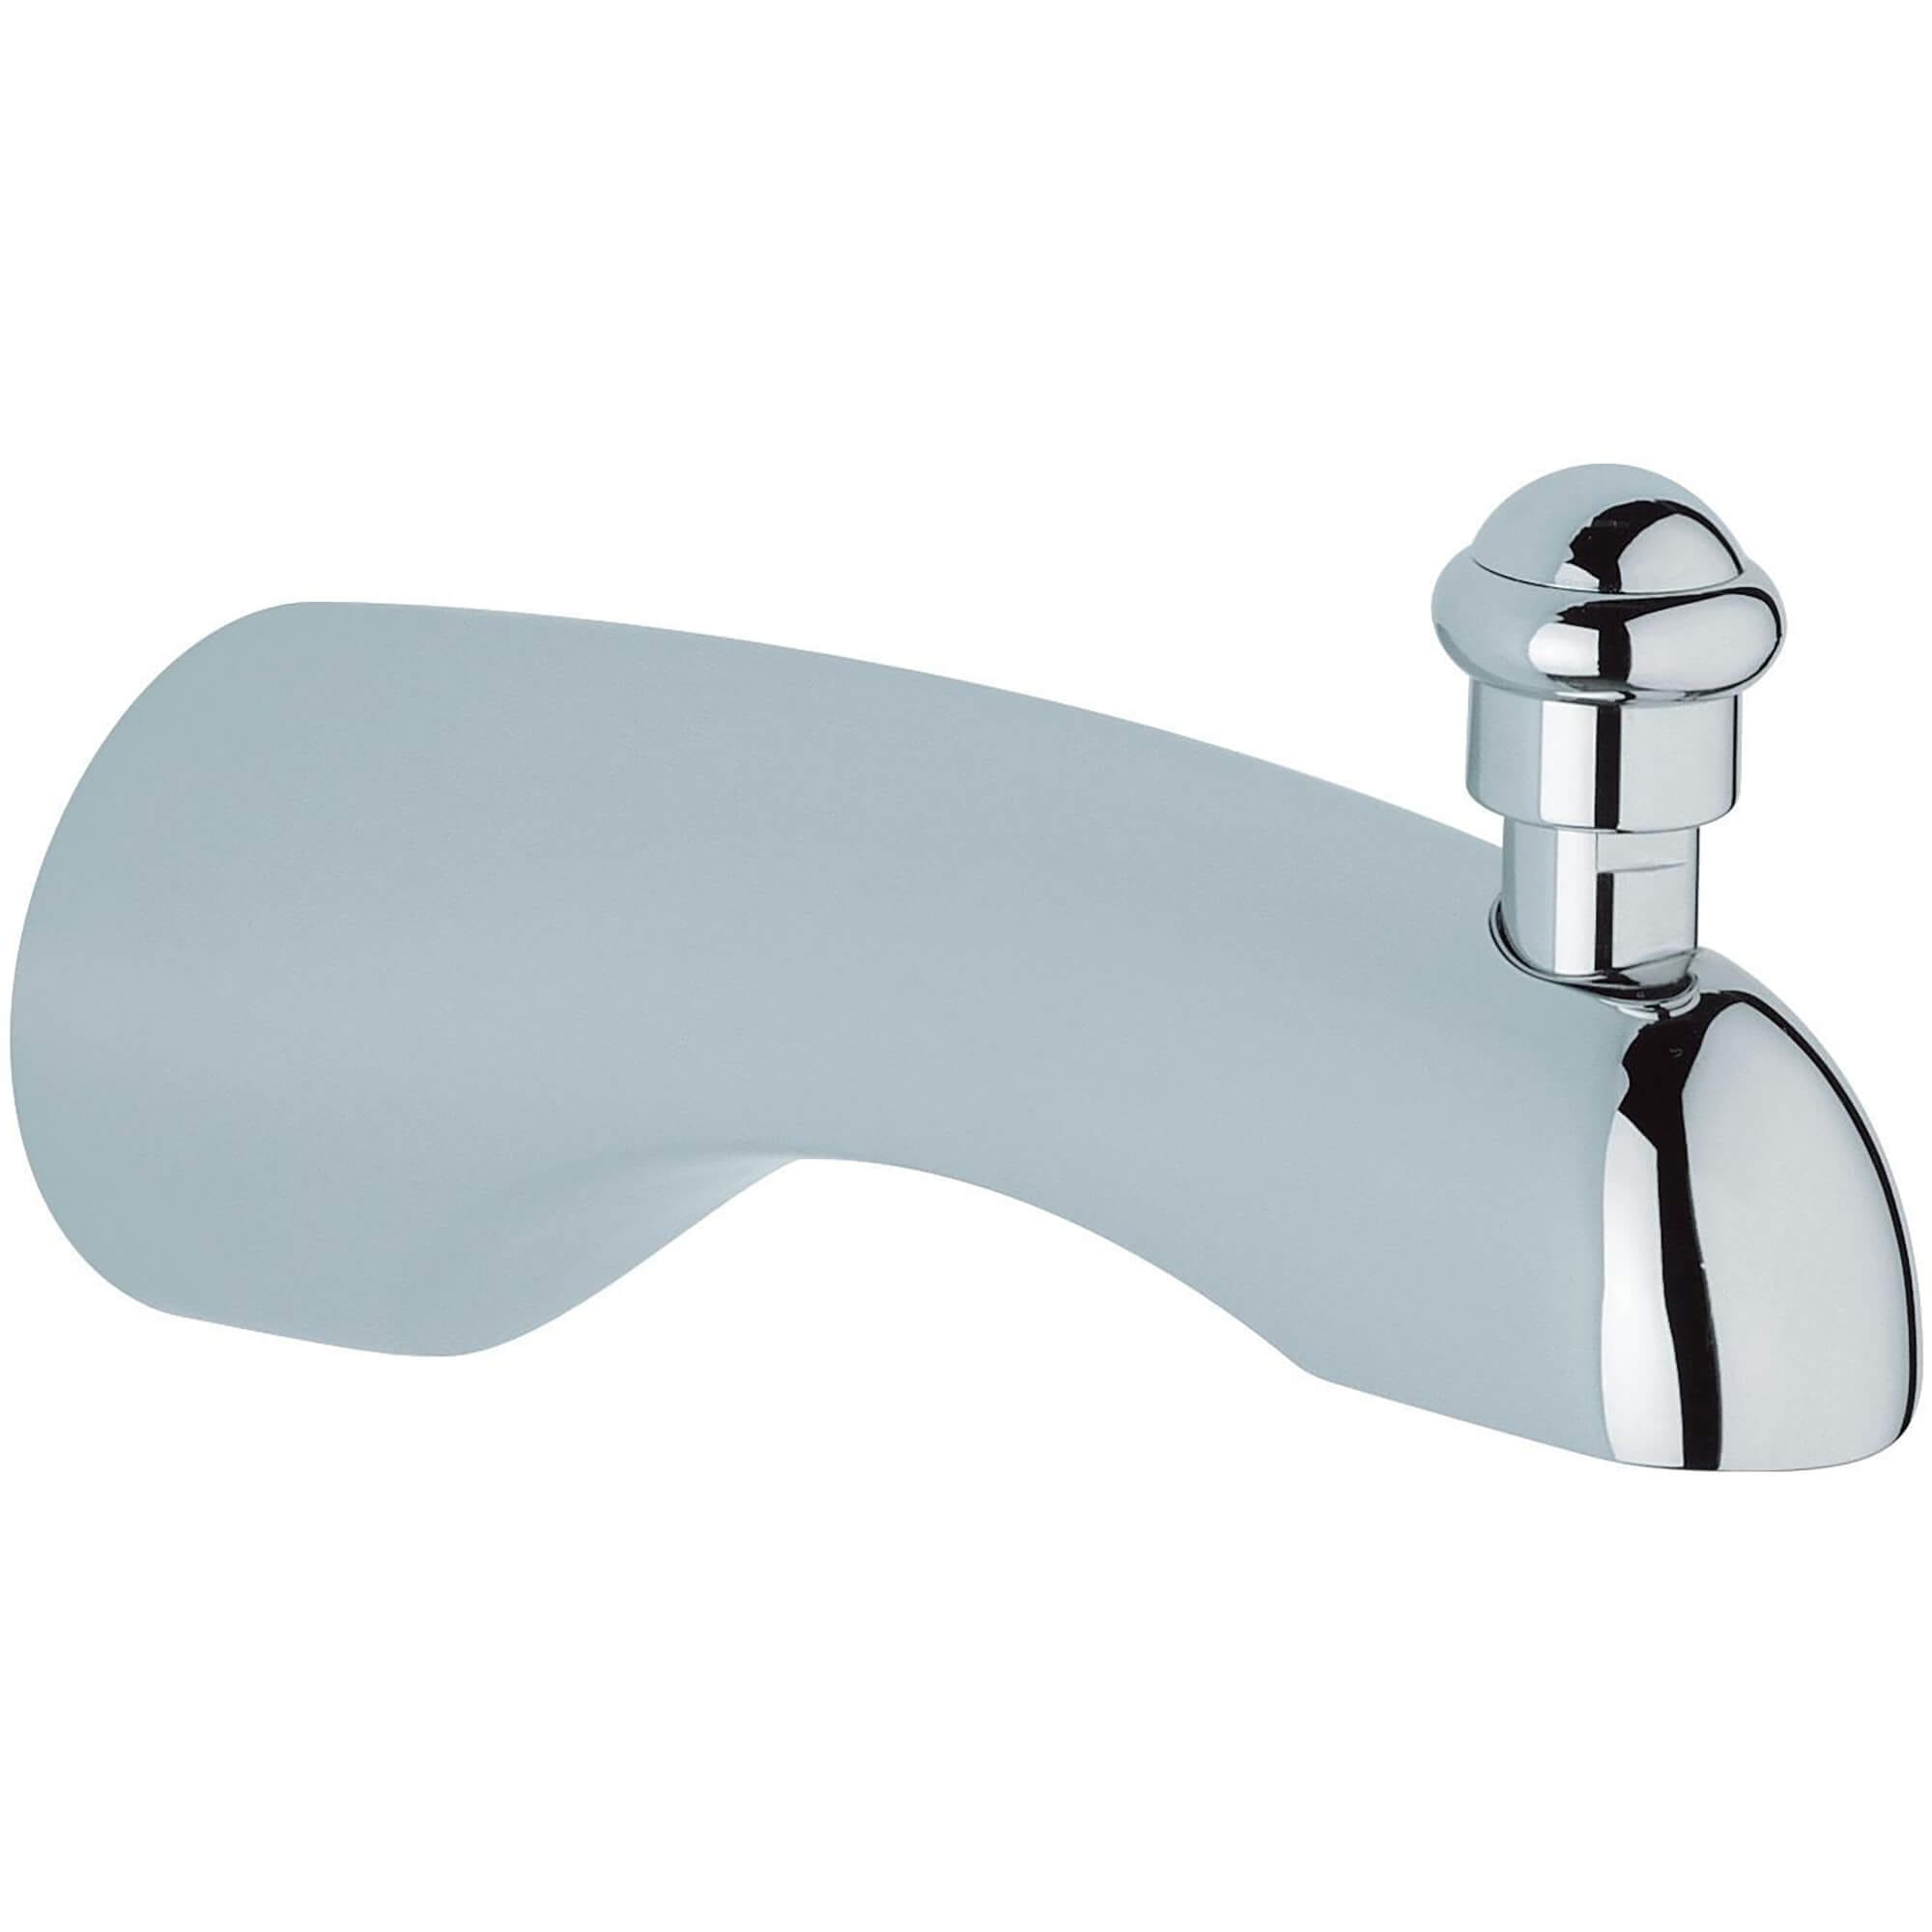 Outlet 6 Inch GROHE CHROME